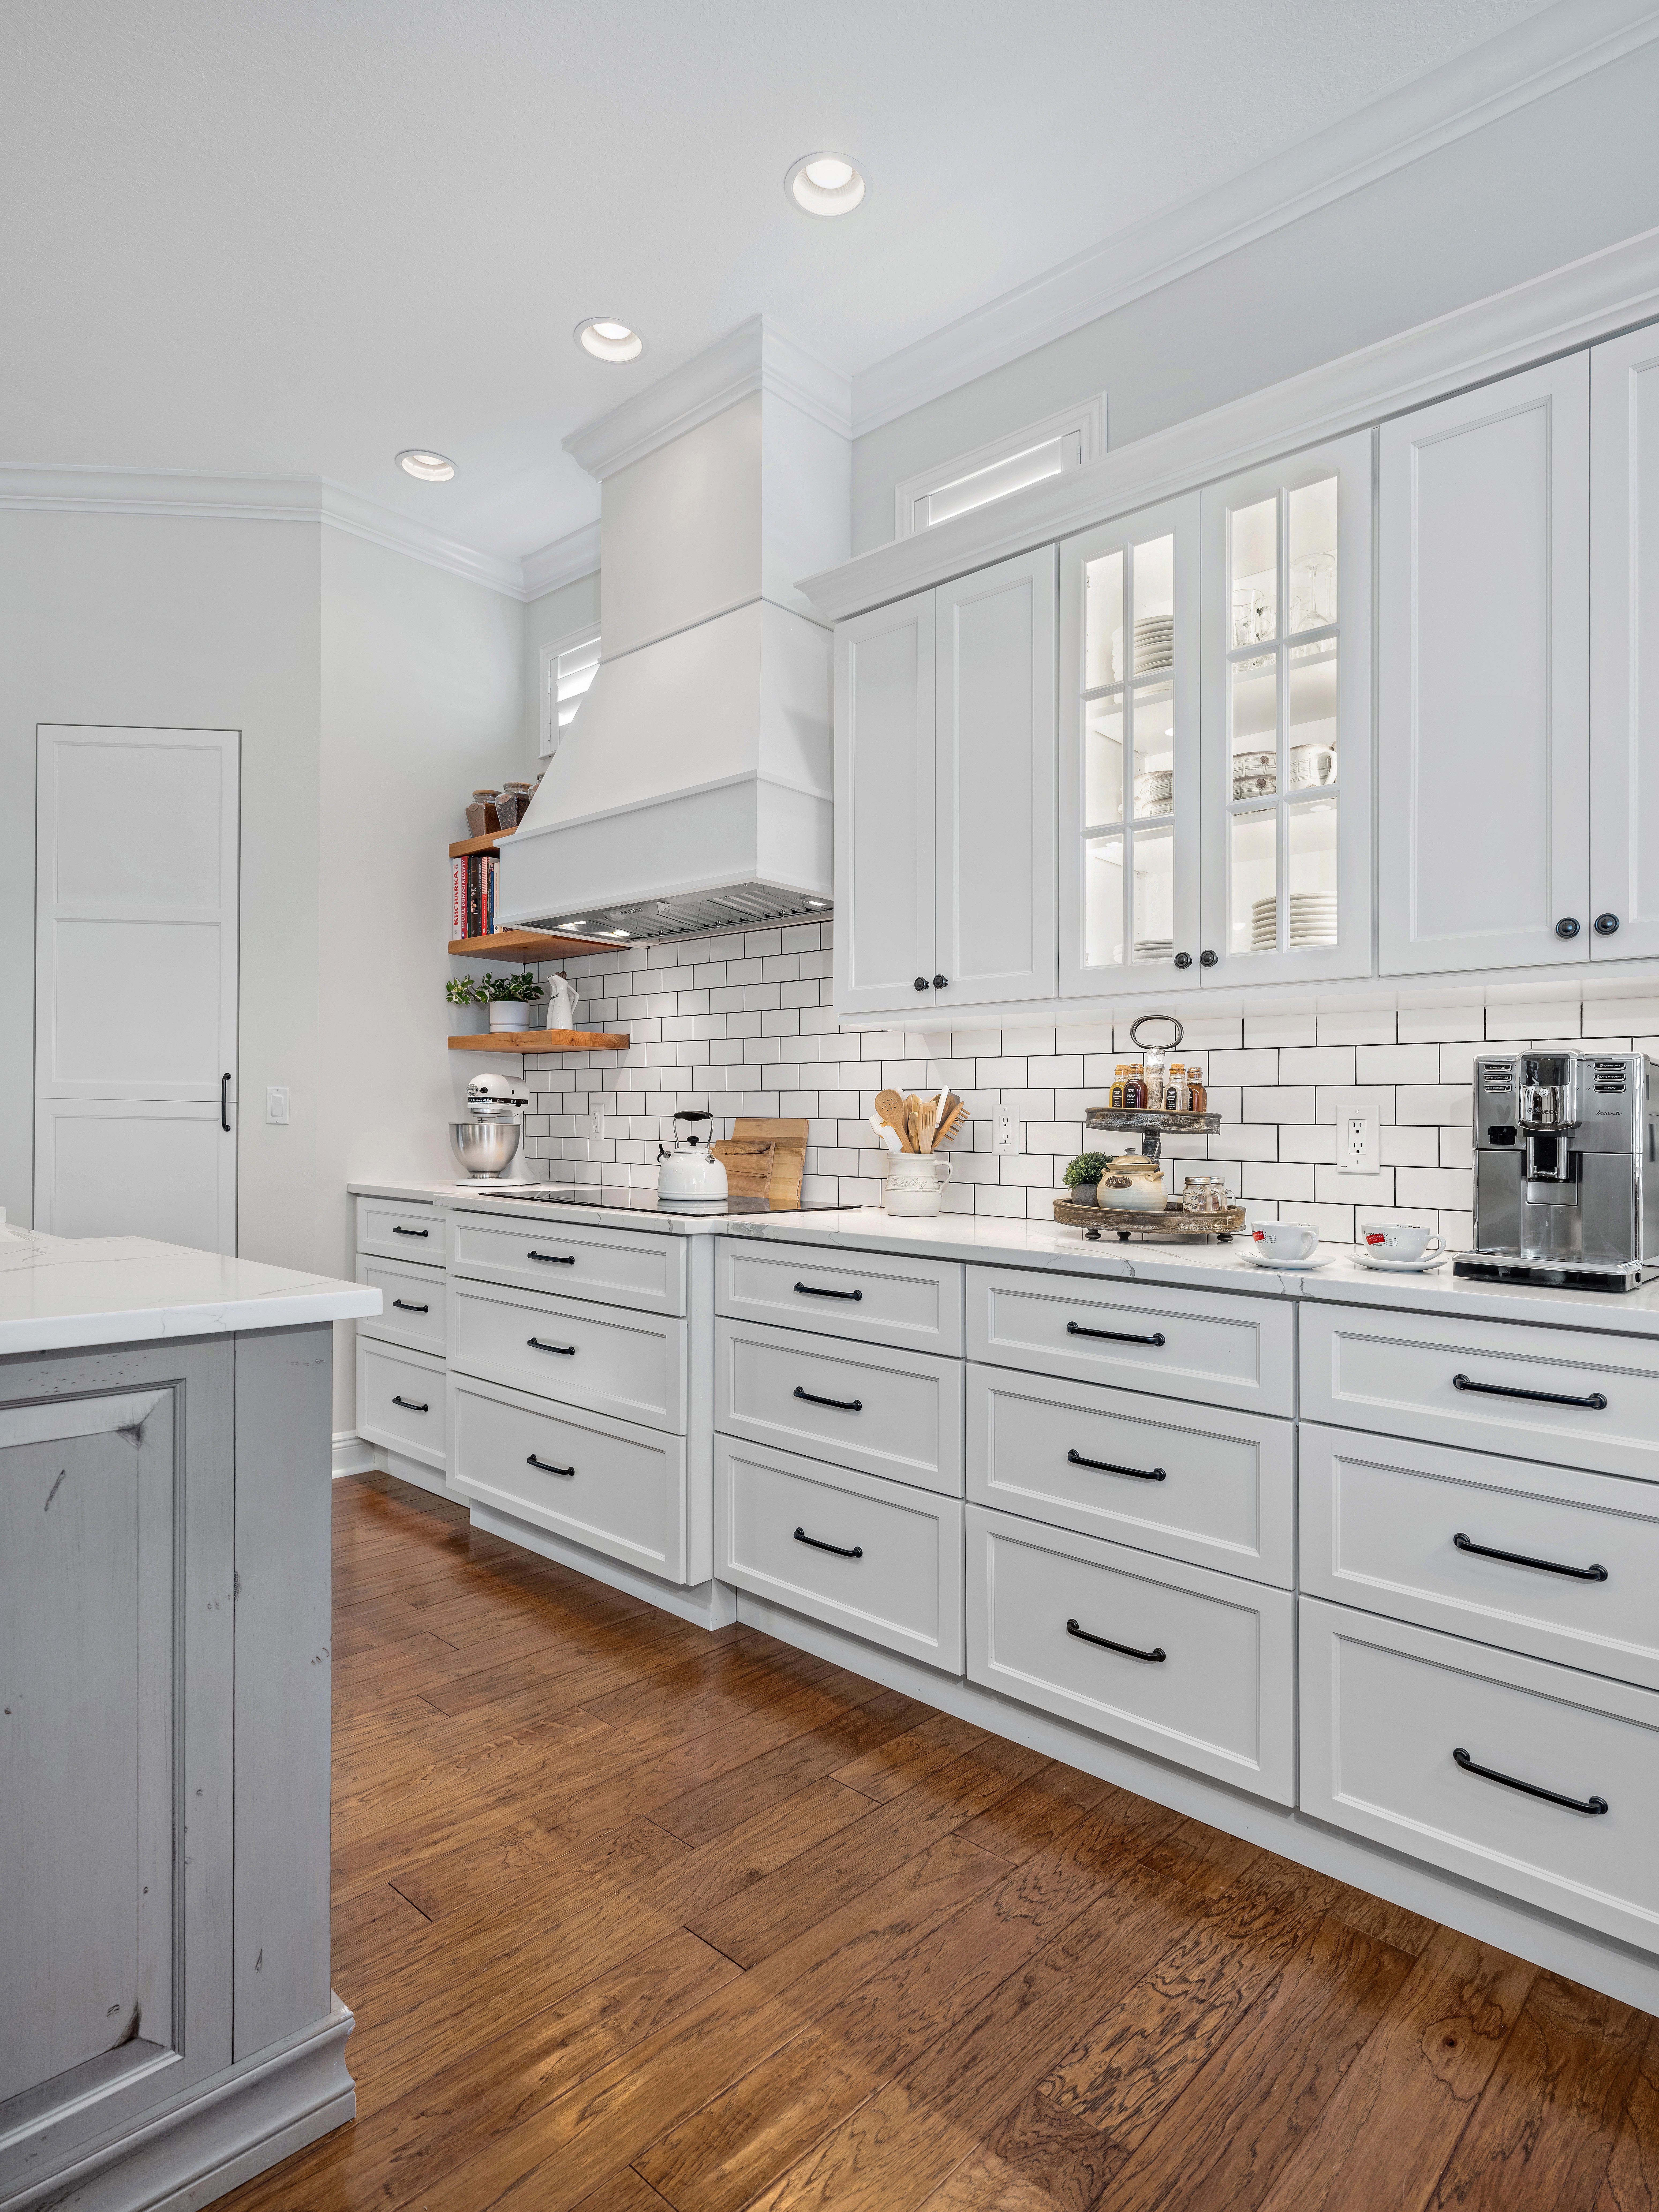 Top 5 Reasons to Remodel Your Kitchen